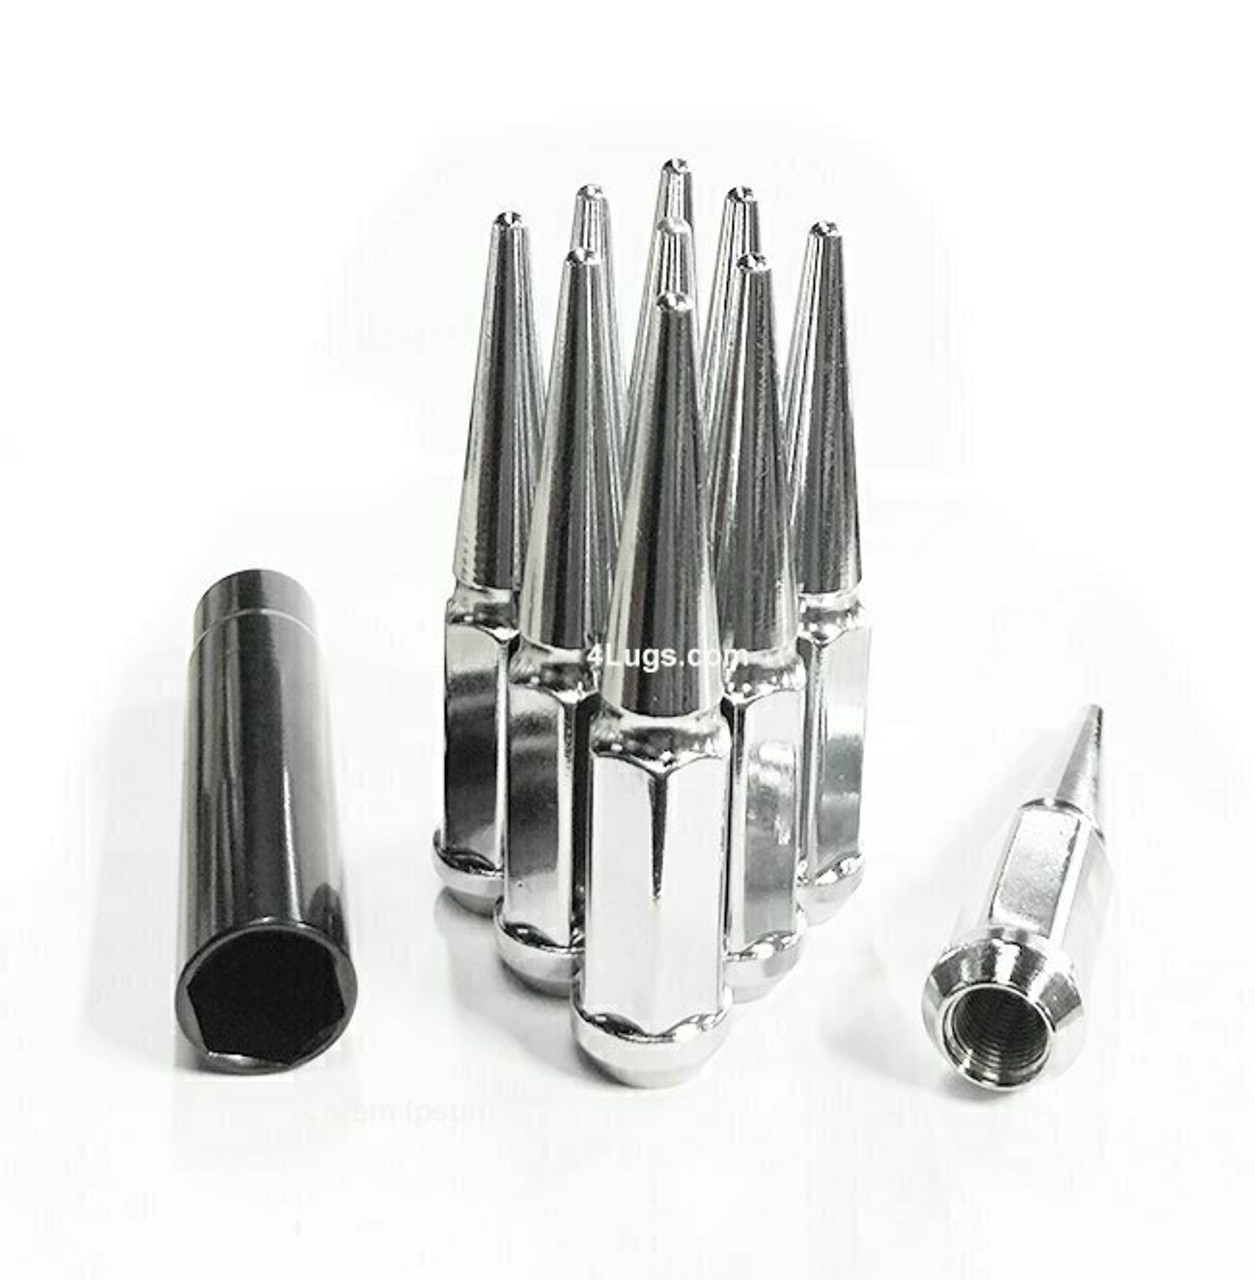 9/16 Chrome Duplex Spike Lug Nuts [3/4" or 19mm Hex] 4.4" Tall - 20 Pieces - Key Included